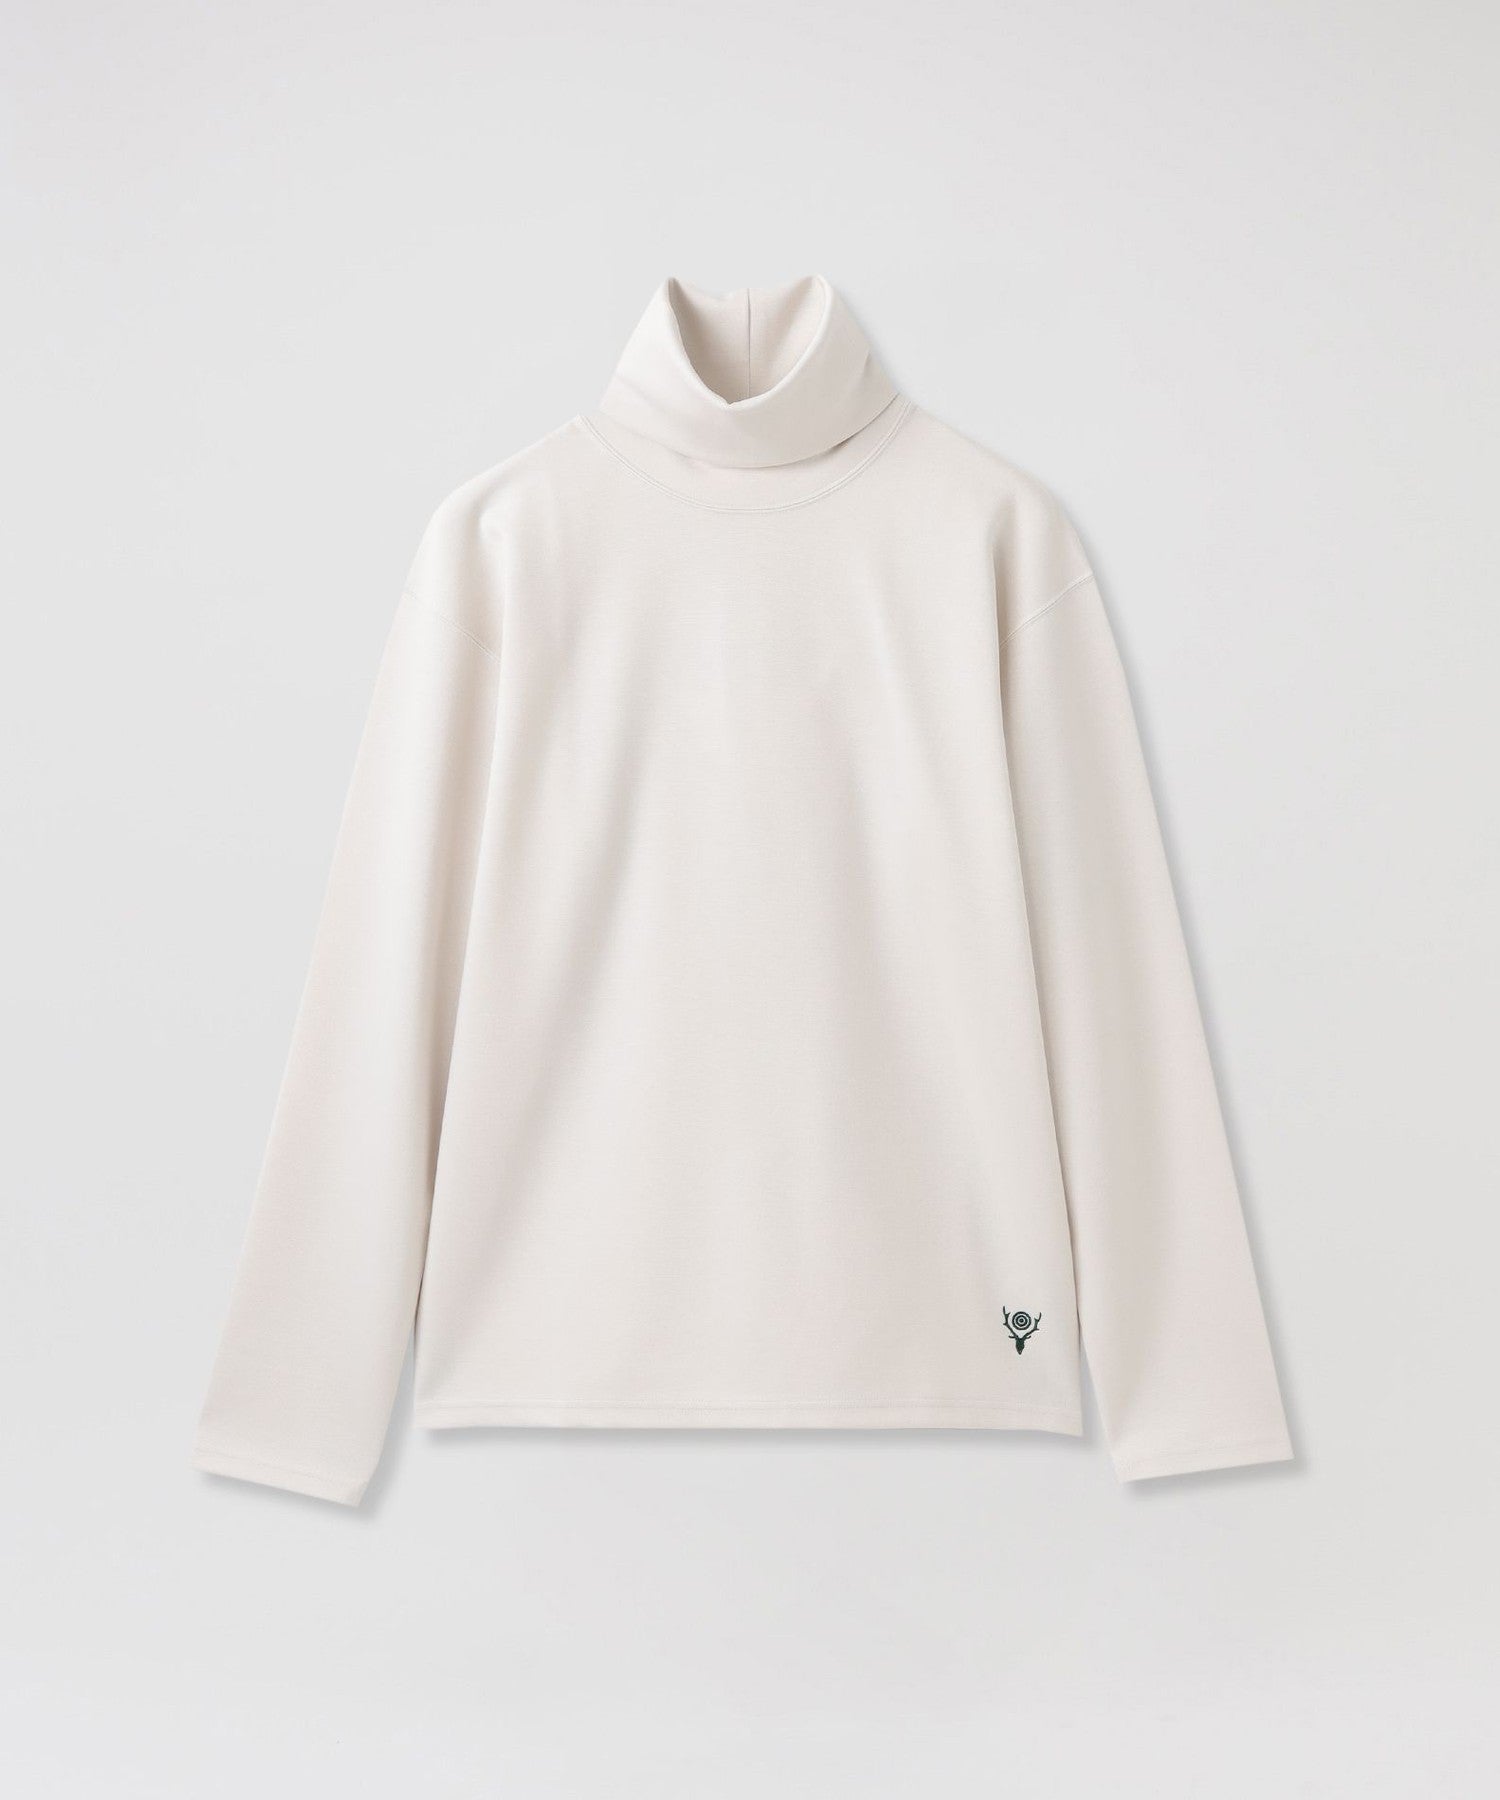 【South2 West8】タートルネックトップス L/S Turtle Neck Tee -Ac/R/N/Pu Smooth Jersey NS836